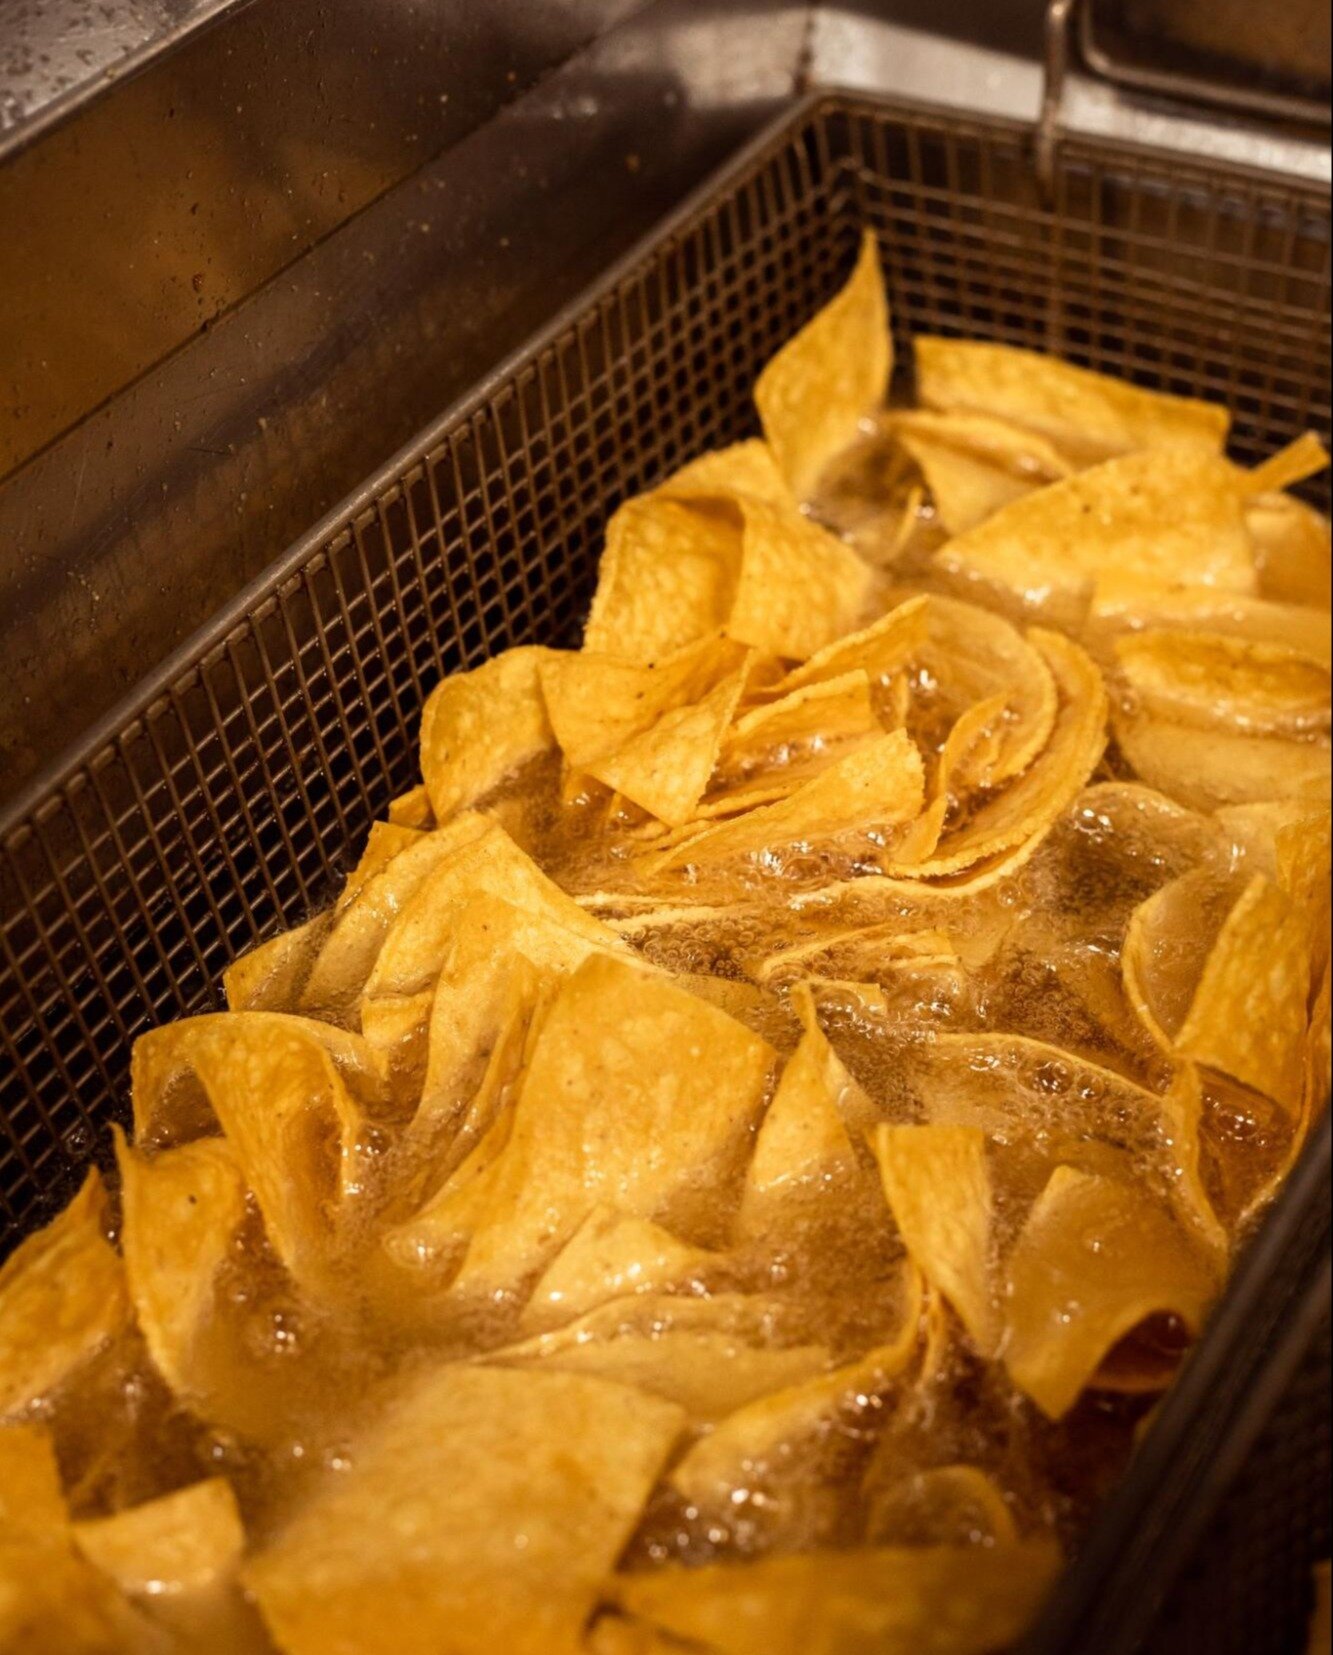 A peak behind the curtain to see how your favorite chips are made. 🔥
&bull;
&bull;
&bull;
&bull;
#tortillachips #mexicanfood #mexicanrestaurant #focotaco #delmarnewyork #518 #upstateny